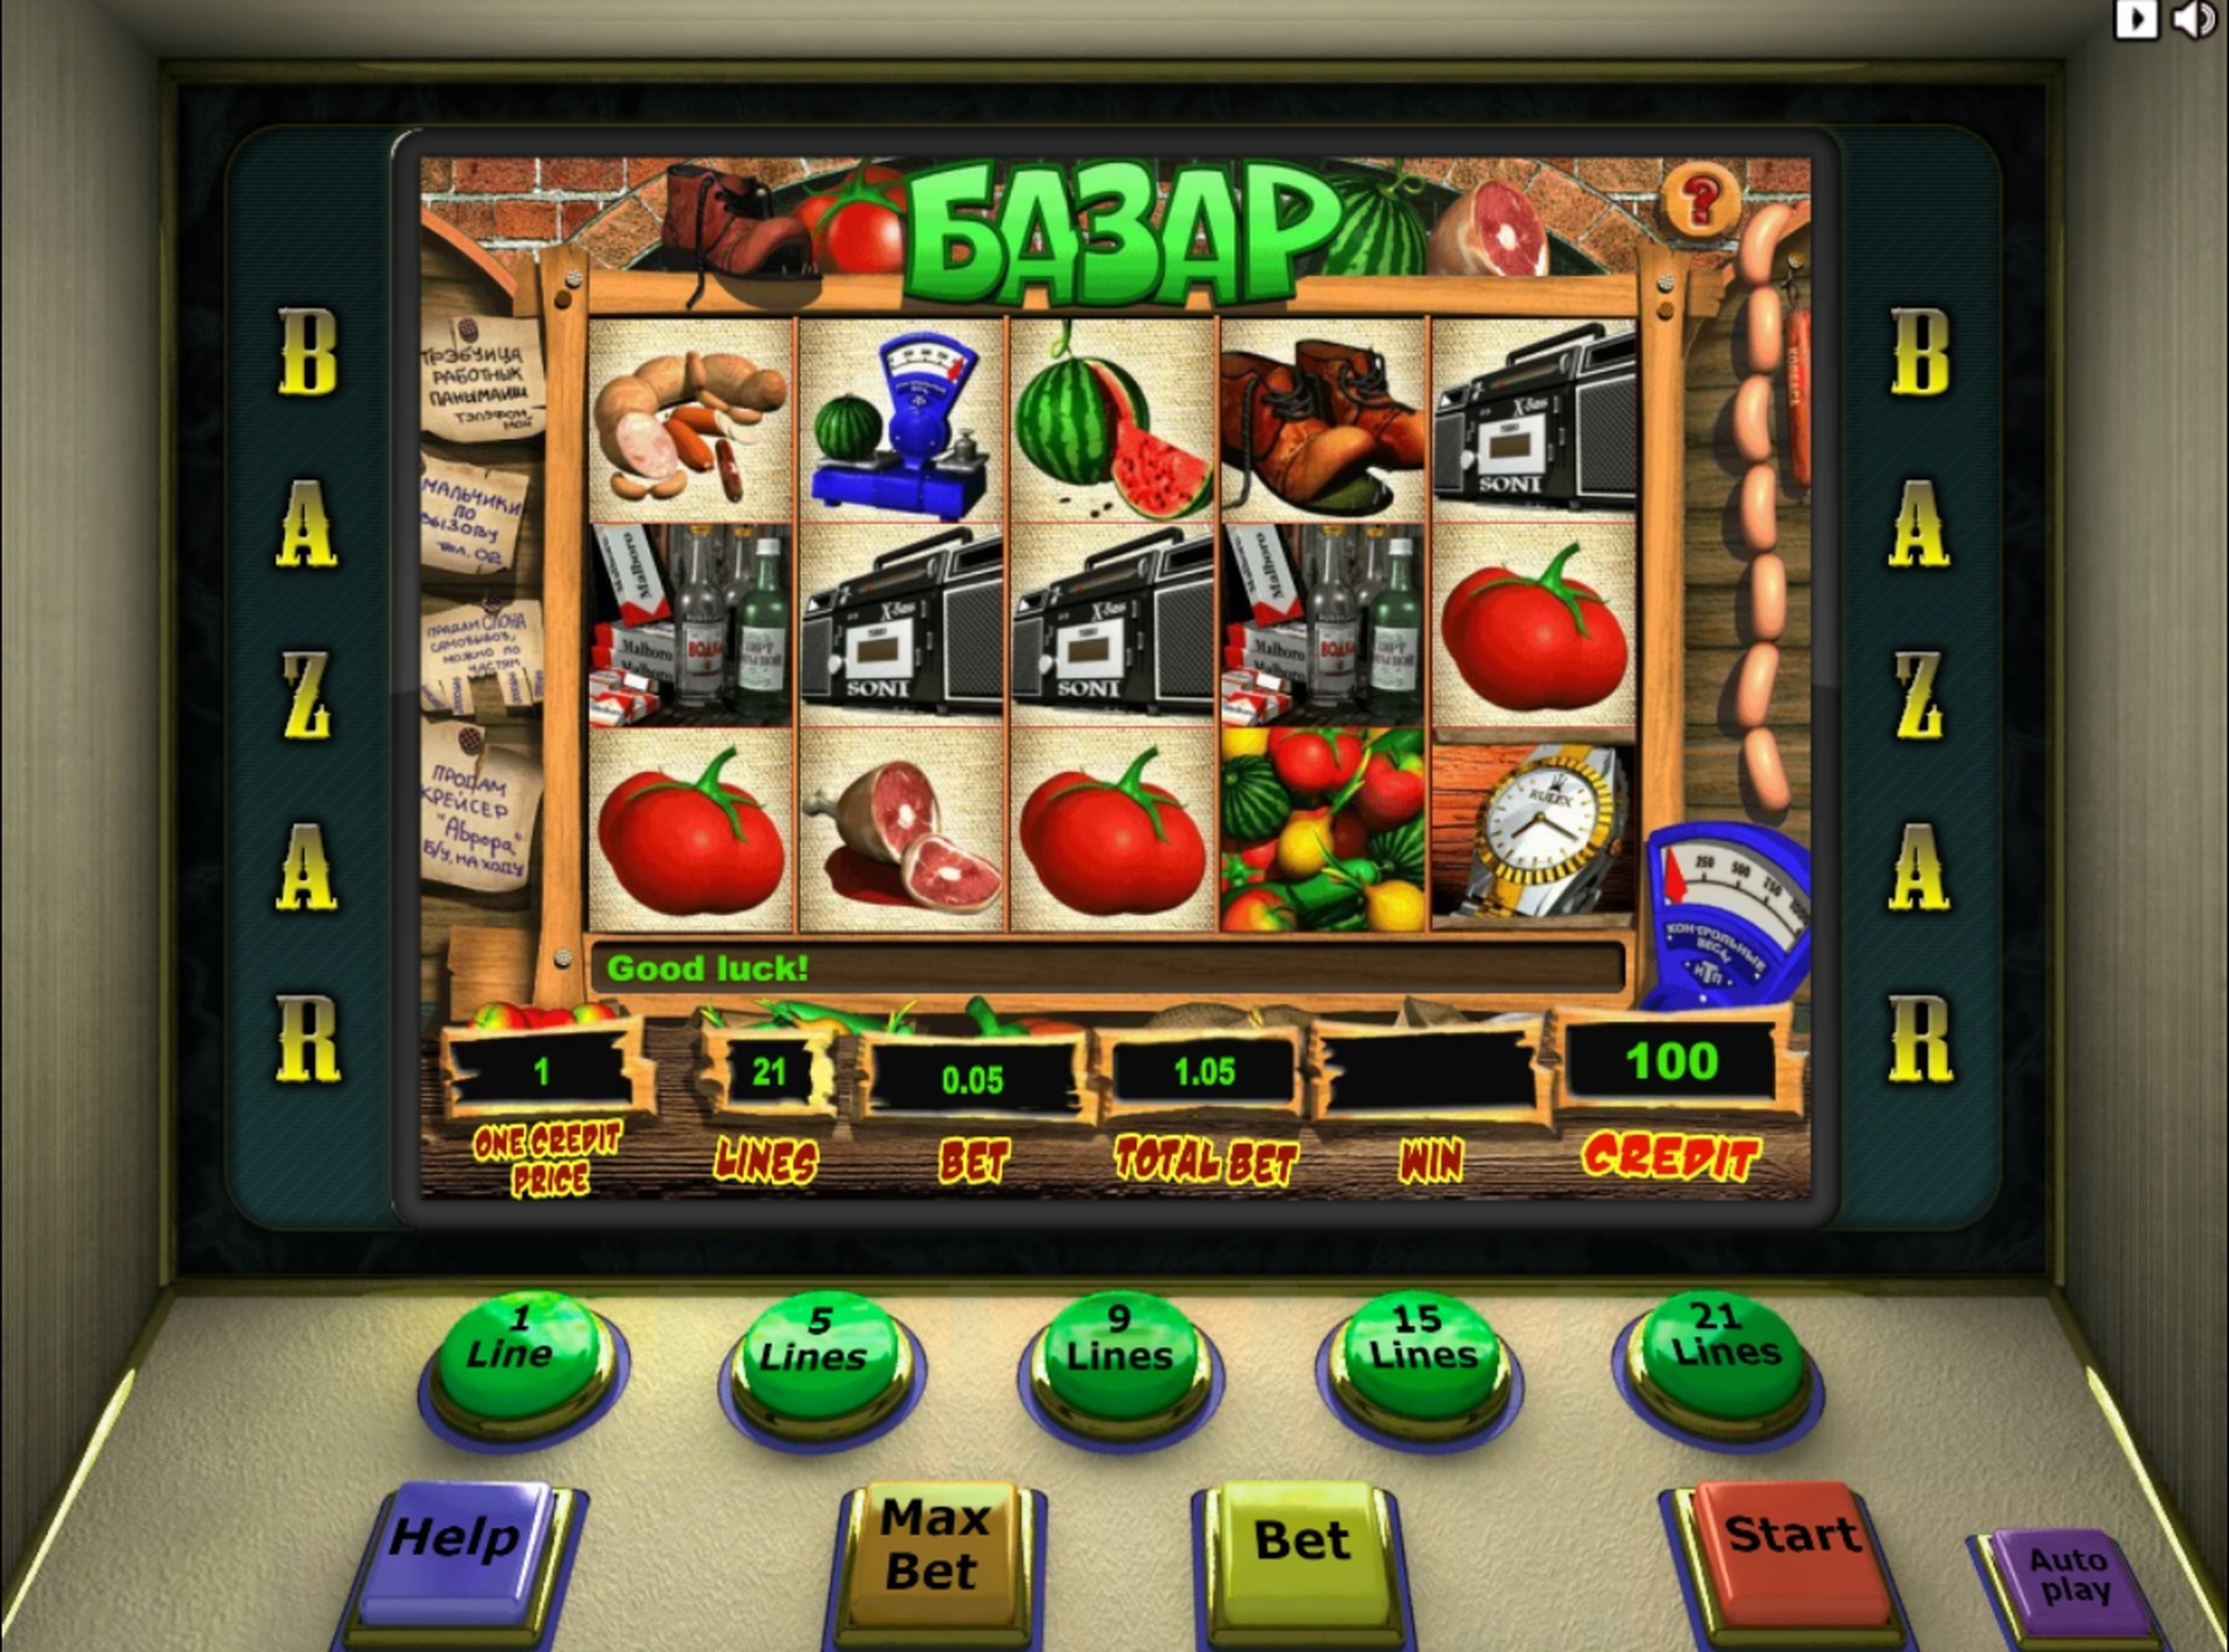 Reels in Bazar Slot Game by Unicum